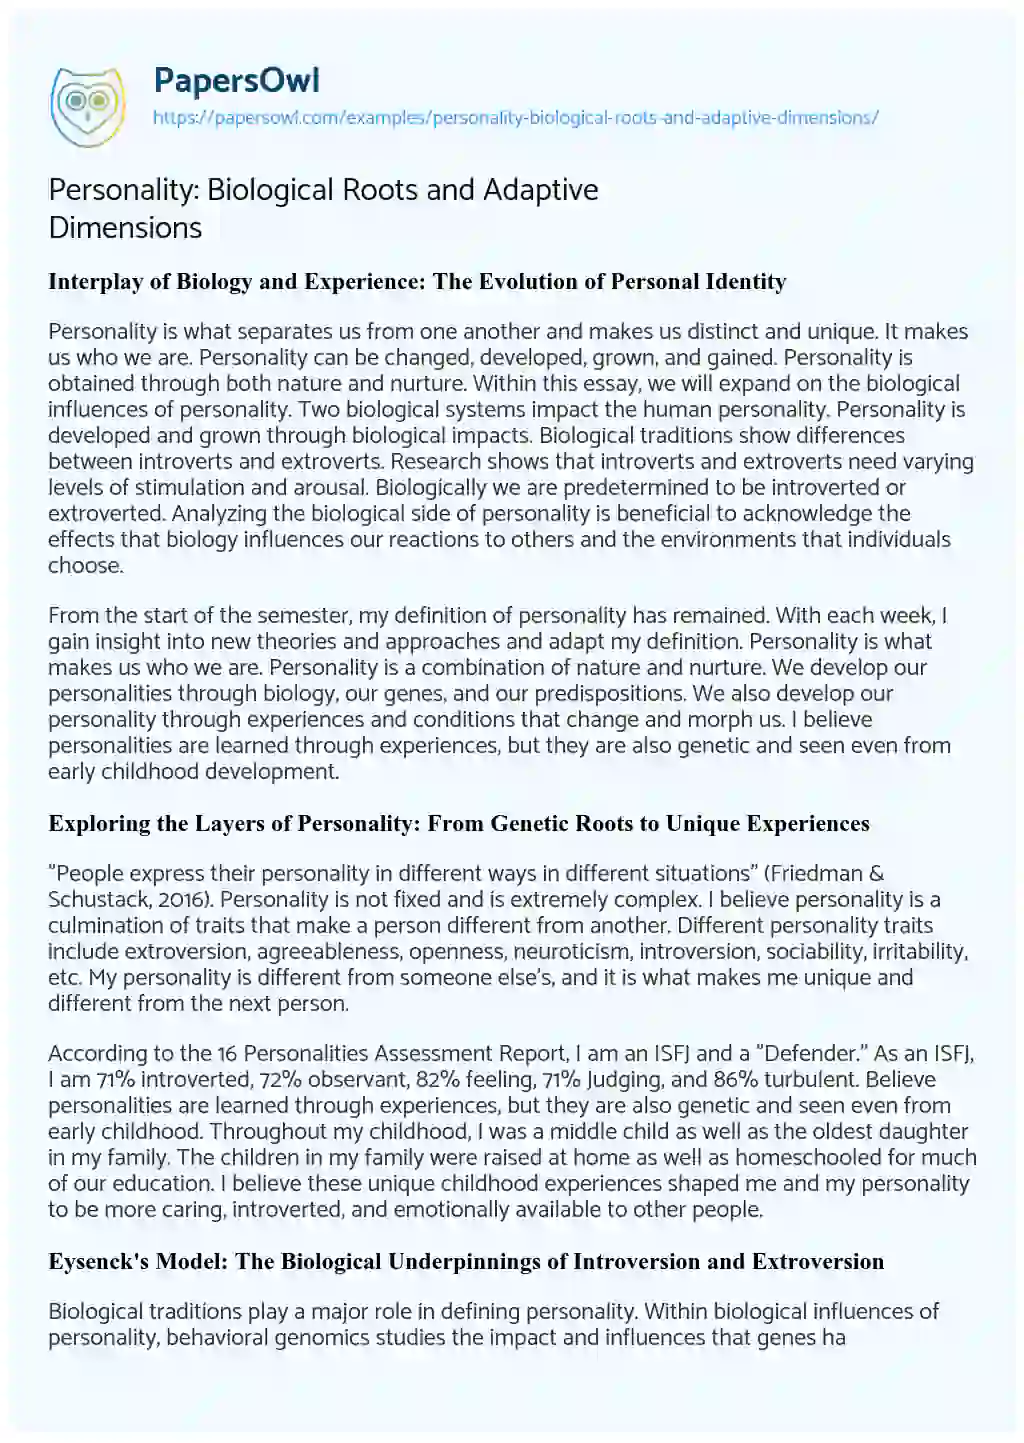 Essay on Personality: Biological Roots and Adaptive Dimensions